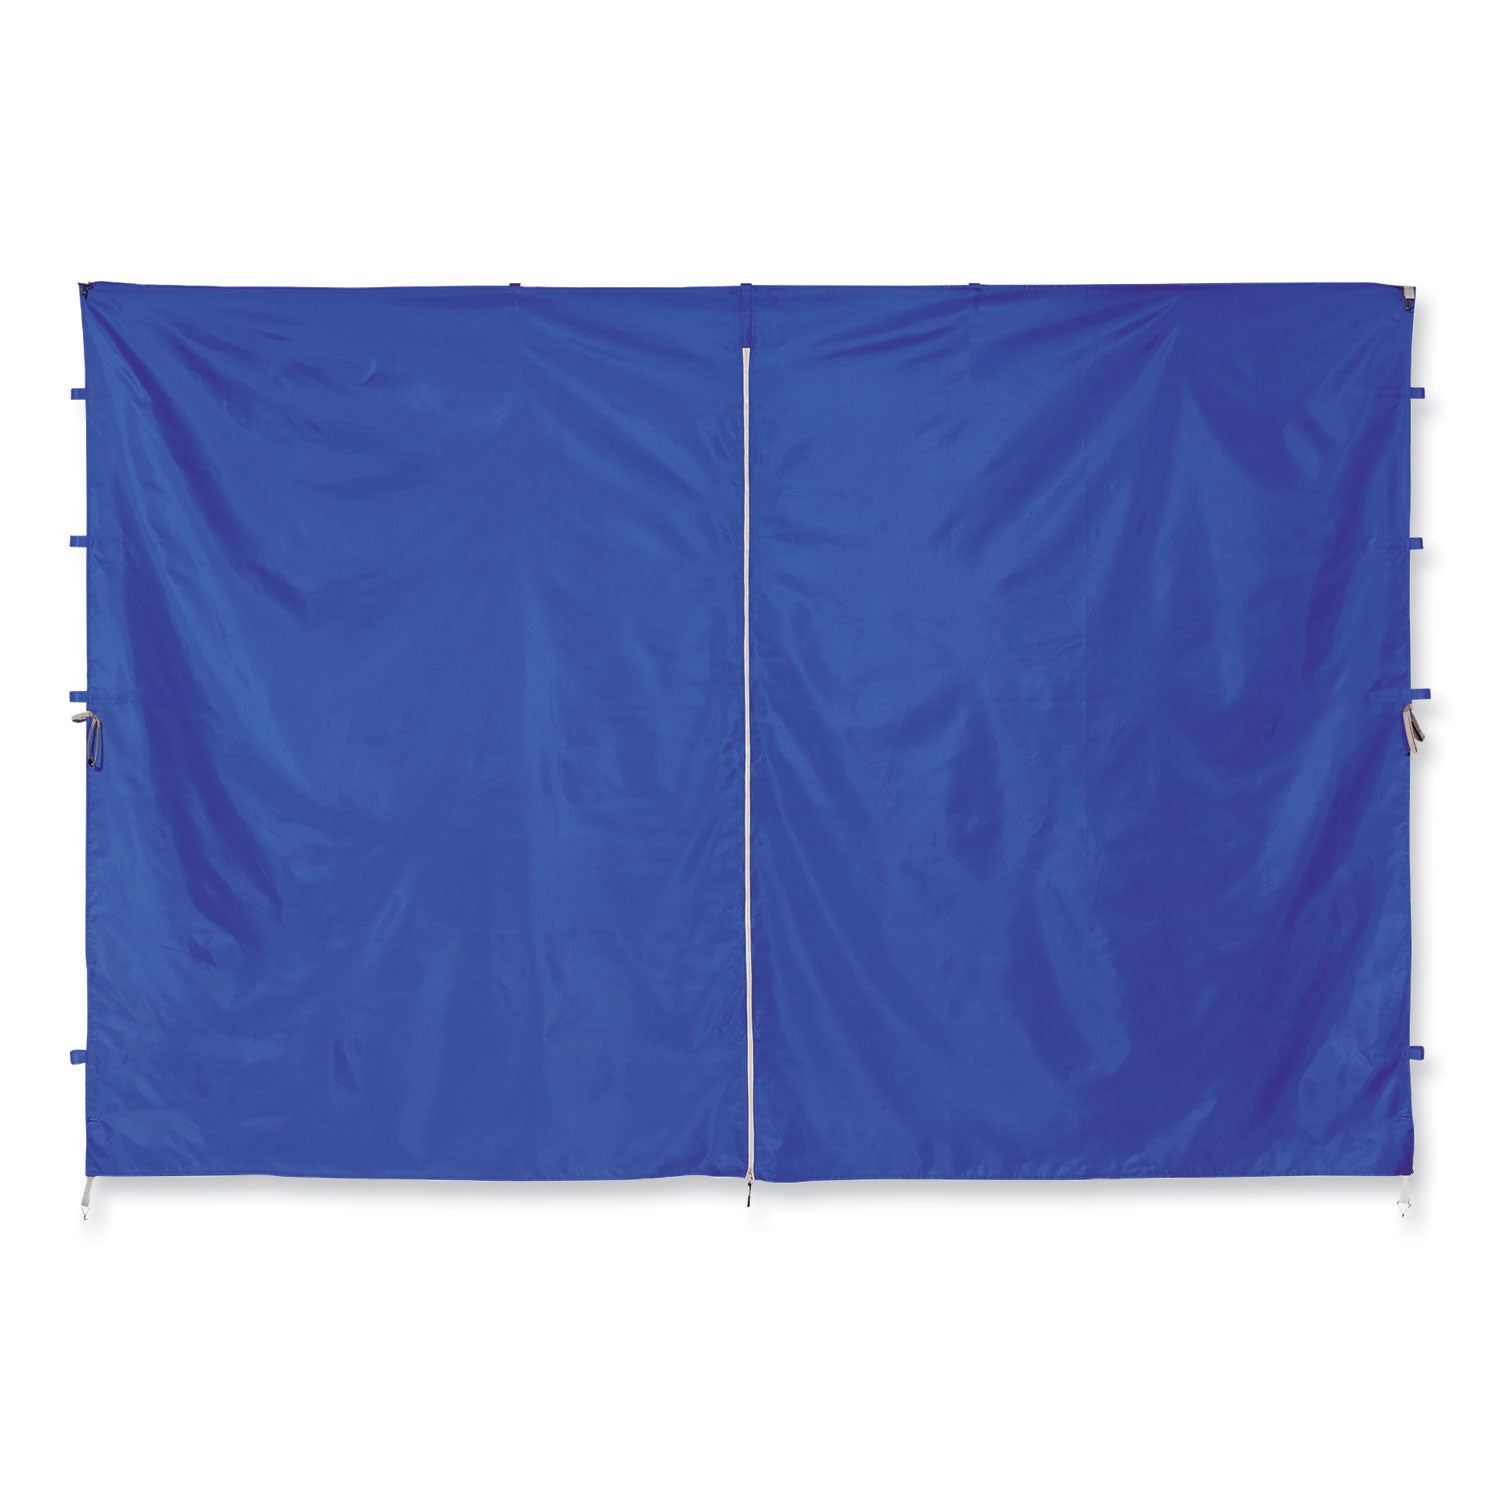 shax-6096-pop-up-tent-sidewall-with-zipper-single-skin-10-ft-x-10-ft-polyester-blue-ships-in-1-3-business-days_ego12979 - 1